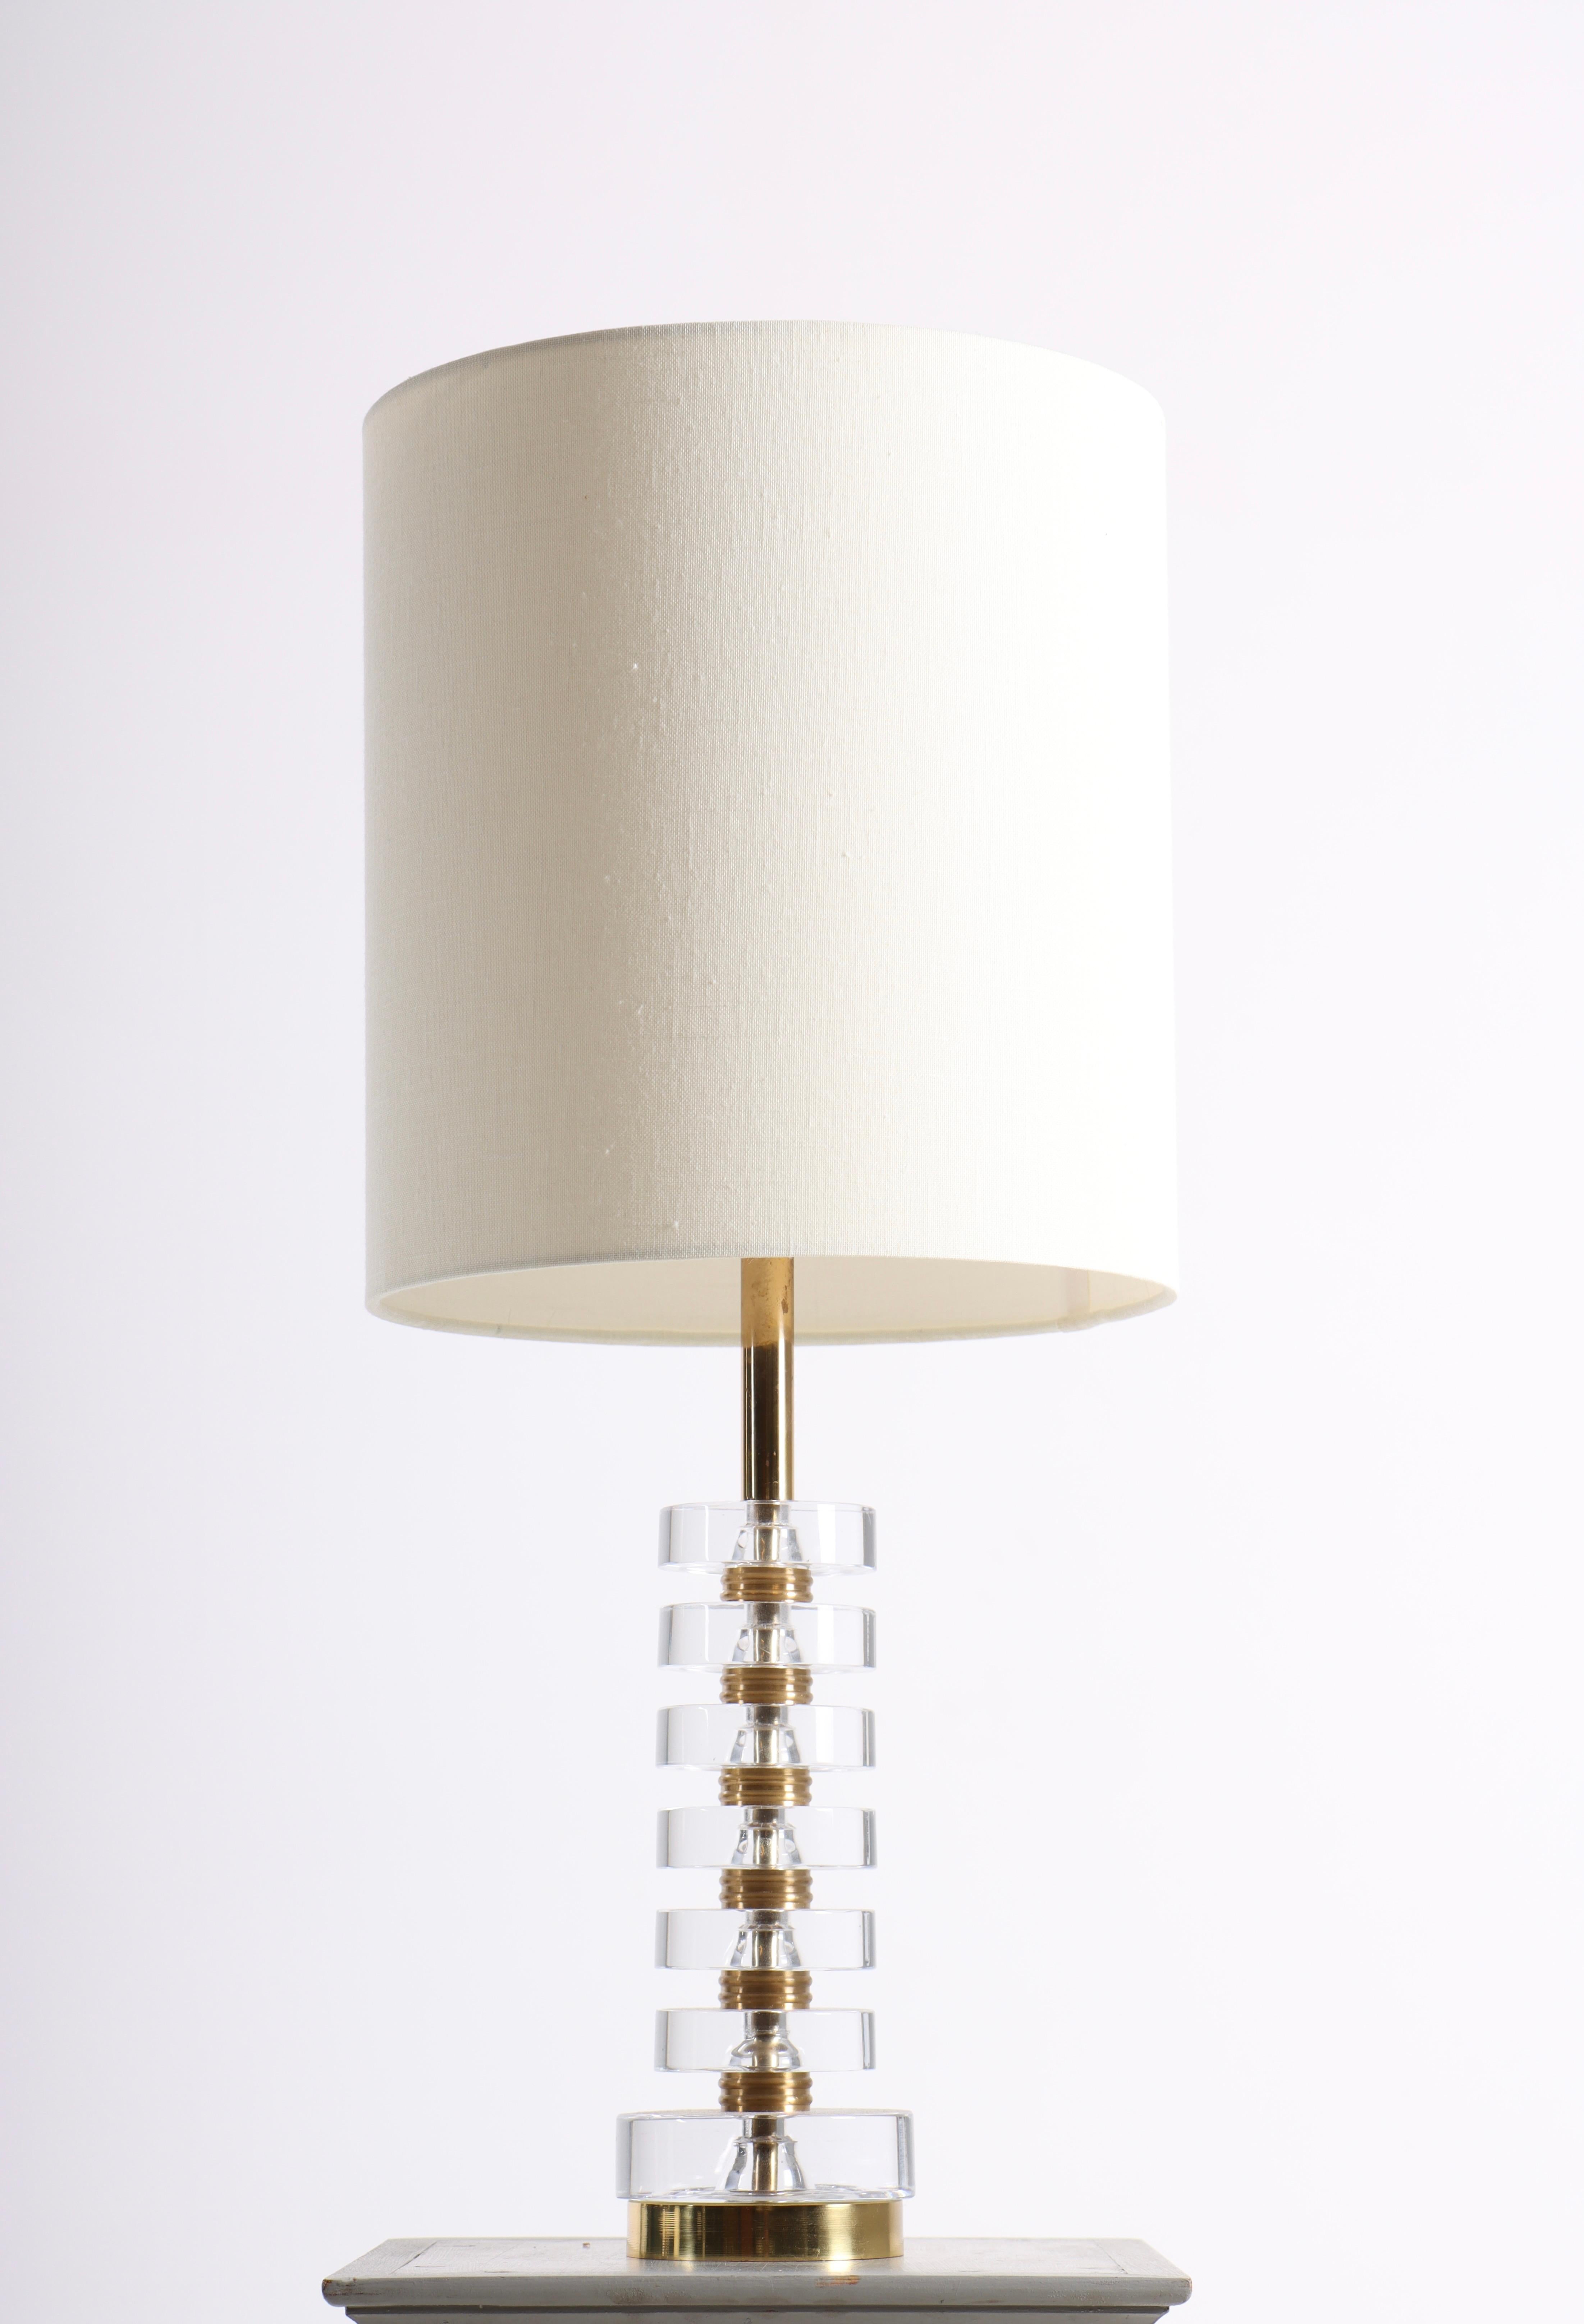 Mid-20th Century Midcentury Table Lamp Designed by Carl Fagerlund for Orrefors Glass, 1950s For Sale